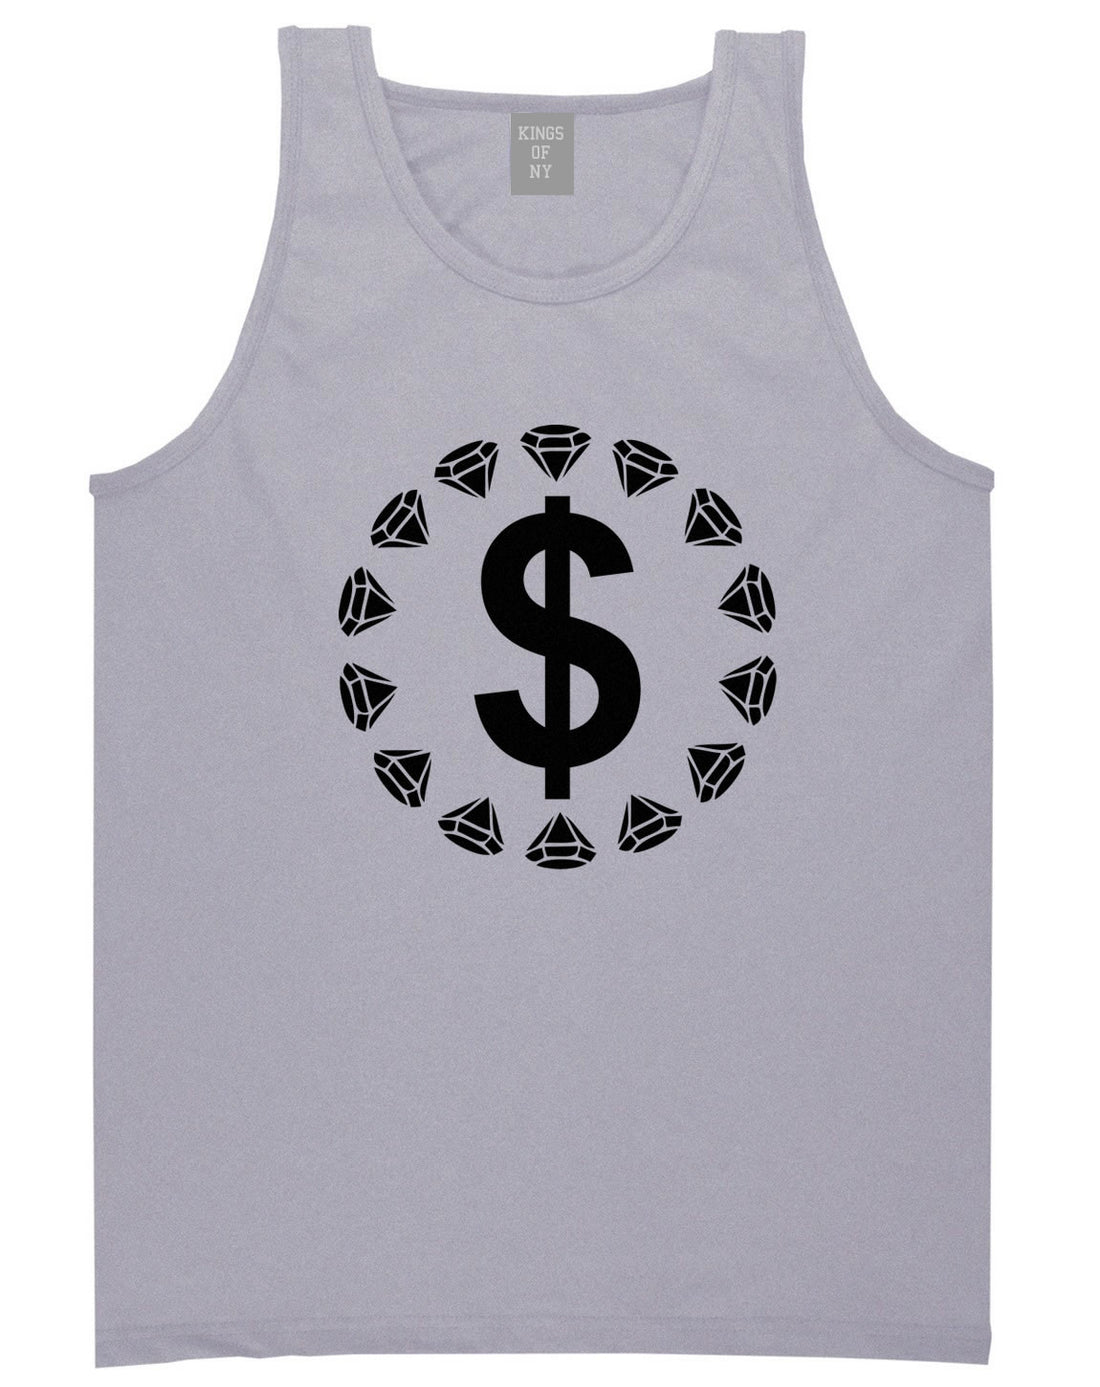 Diamonds Money Sign Logo Tank Top in Grey by Kings Of NY